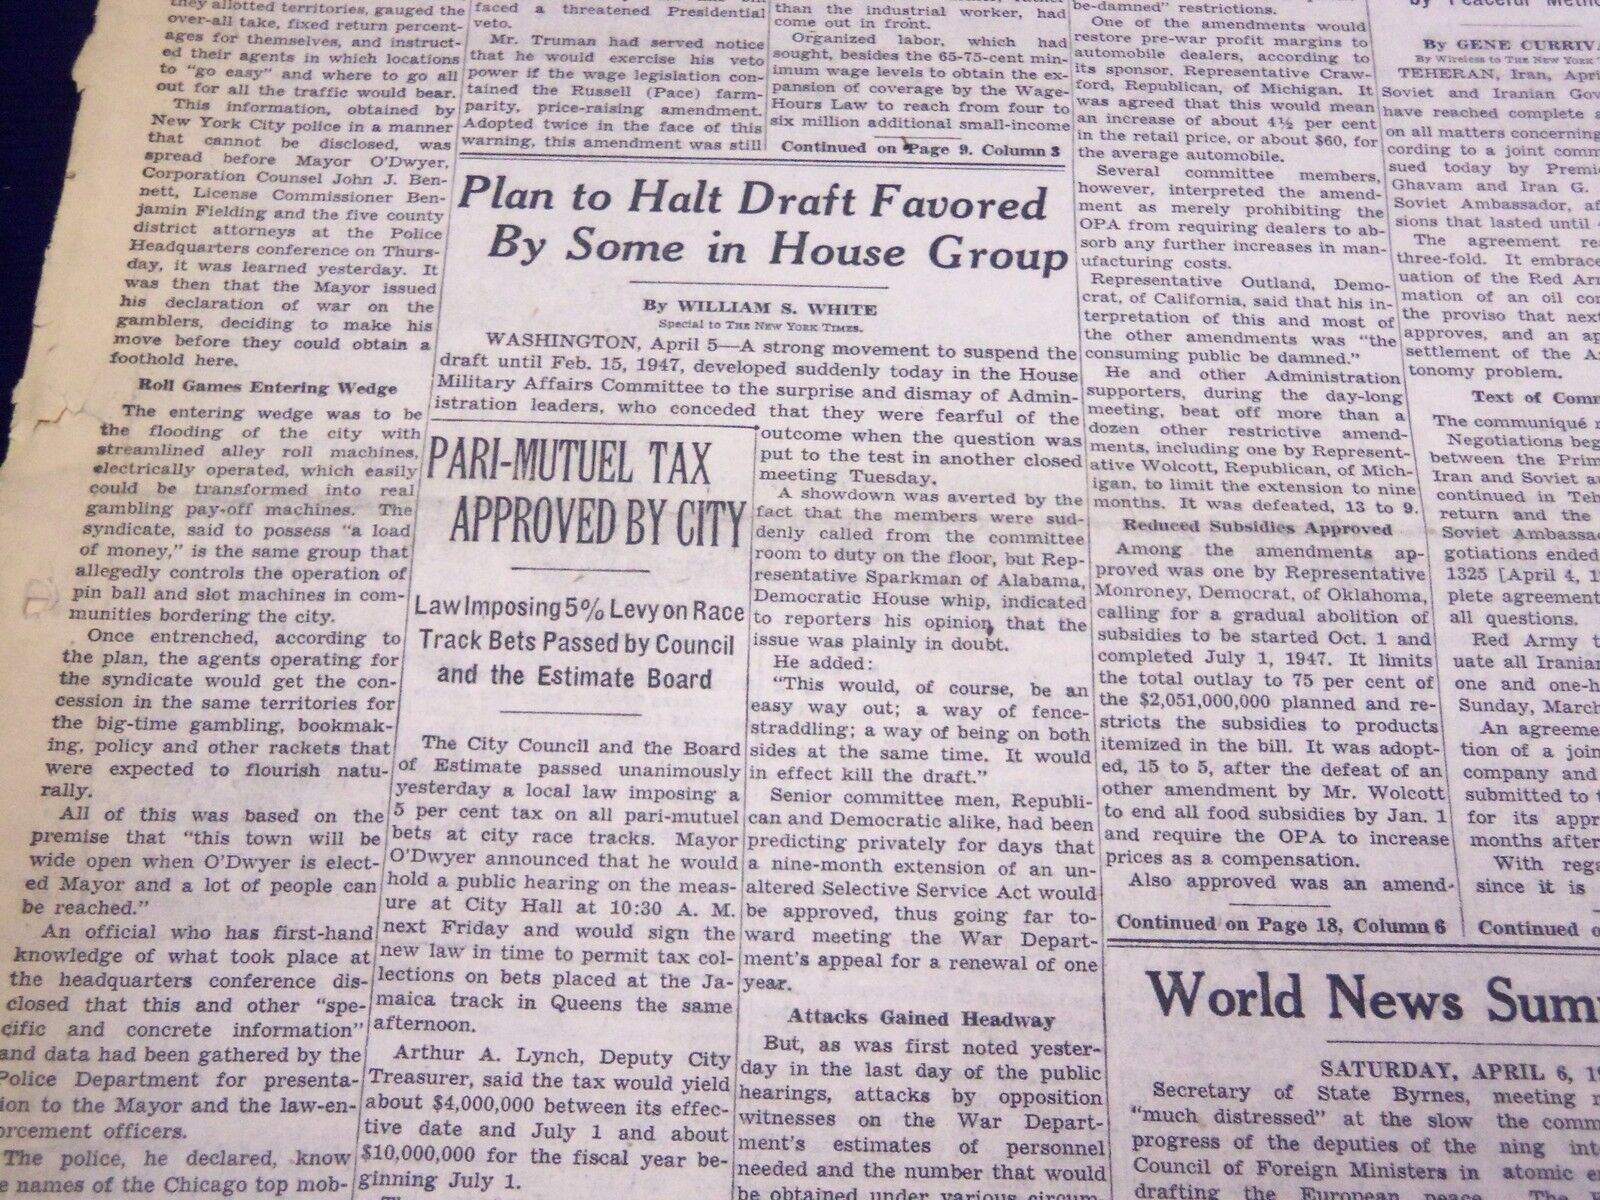 1946 APRIL 6 NEW YORK TIMES - PARI-MUTUEL TAX APPROVED BY CITY - NT 2294